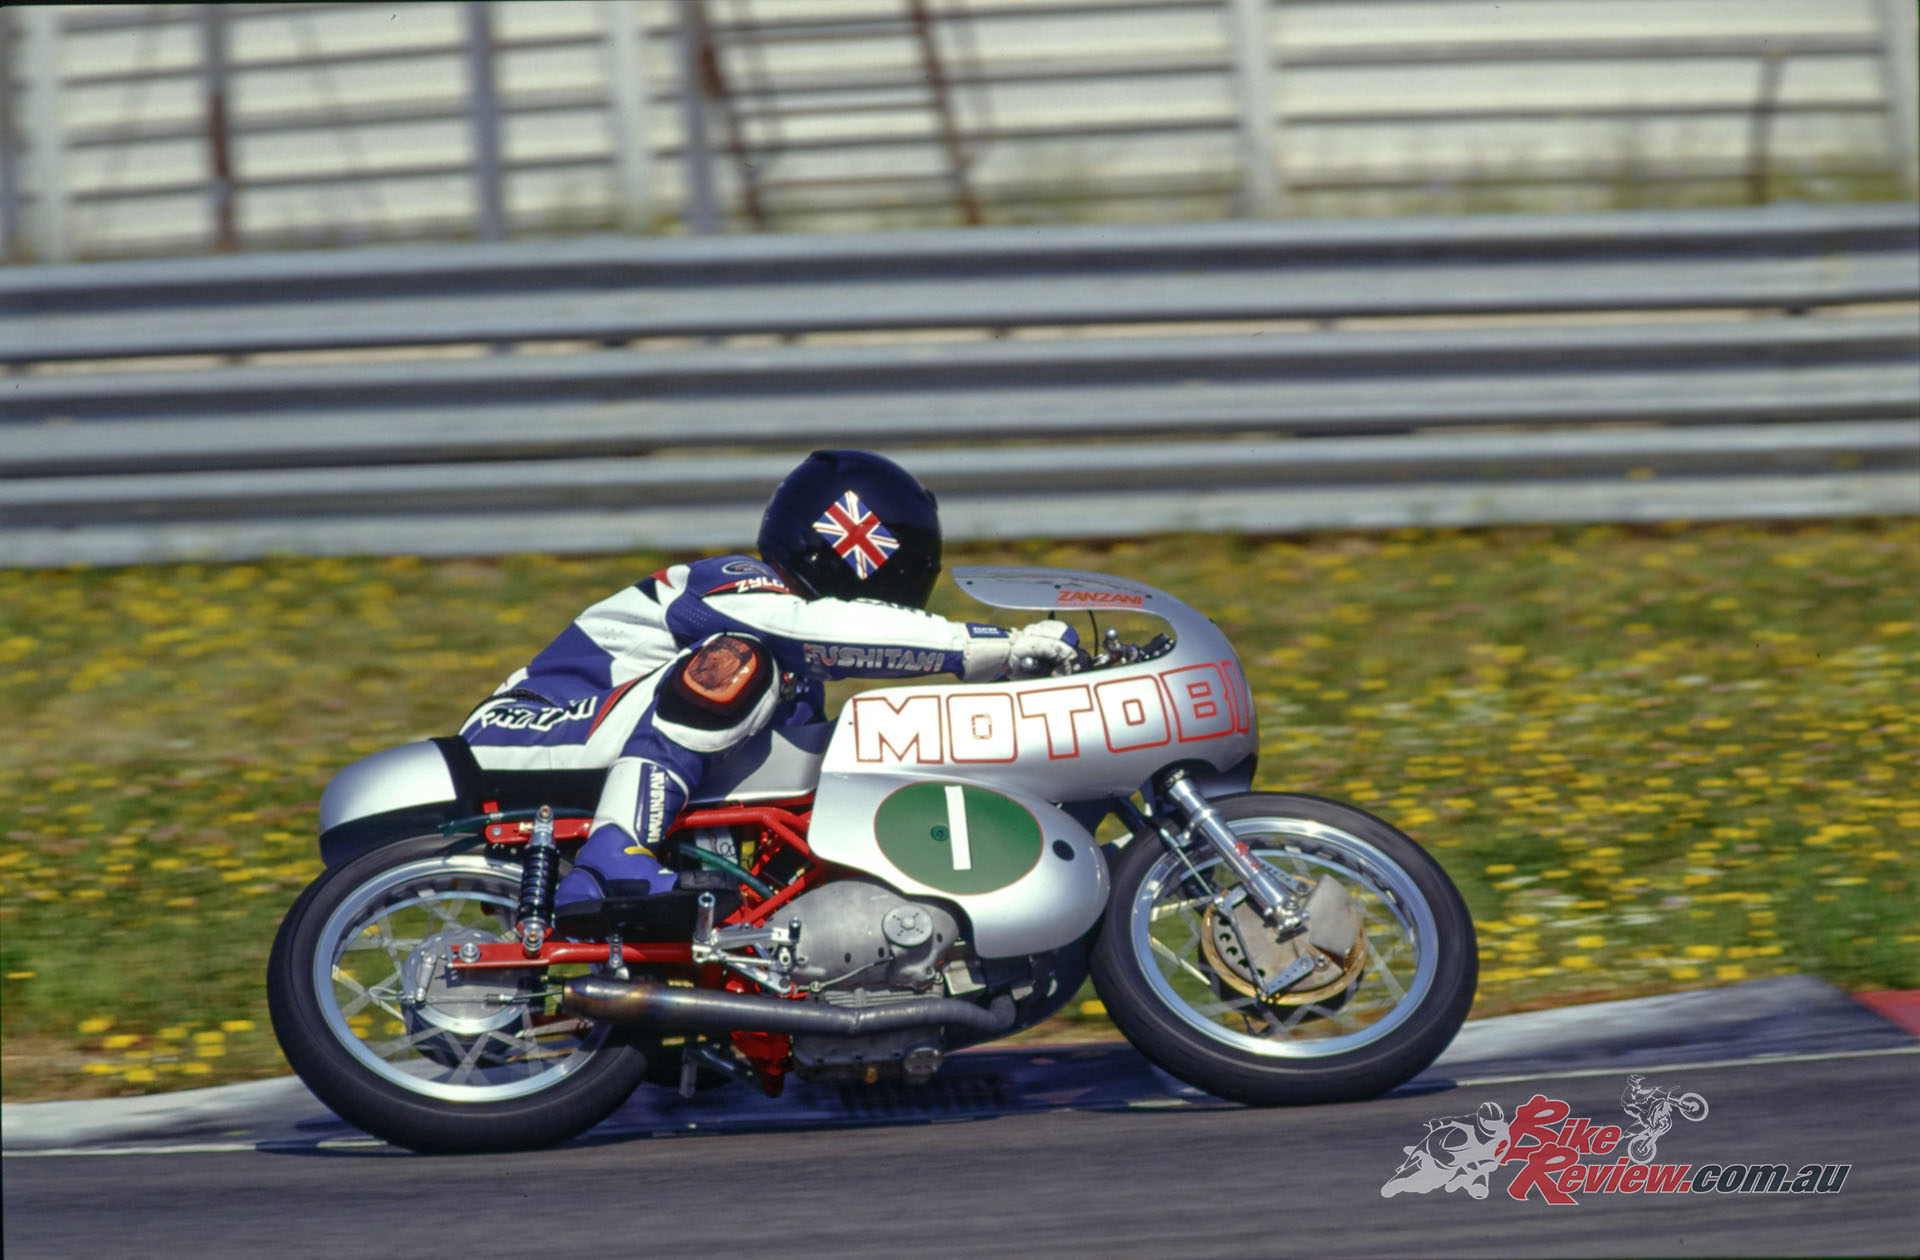 In the Italian summer of 1998, Cathcart took Primo up on his offer to ride the MotoBi at the tight 2.51km Magione circuit near Perugia – an ideal track to sample the merits of these light, nimble four-stroke singles. 